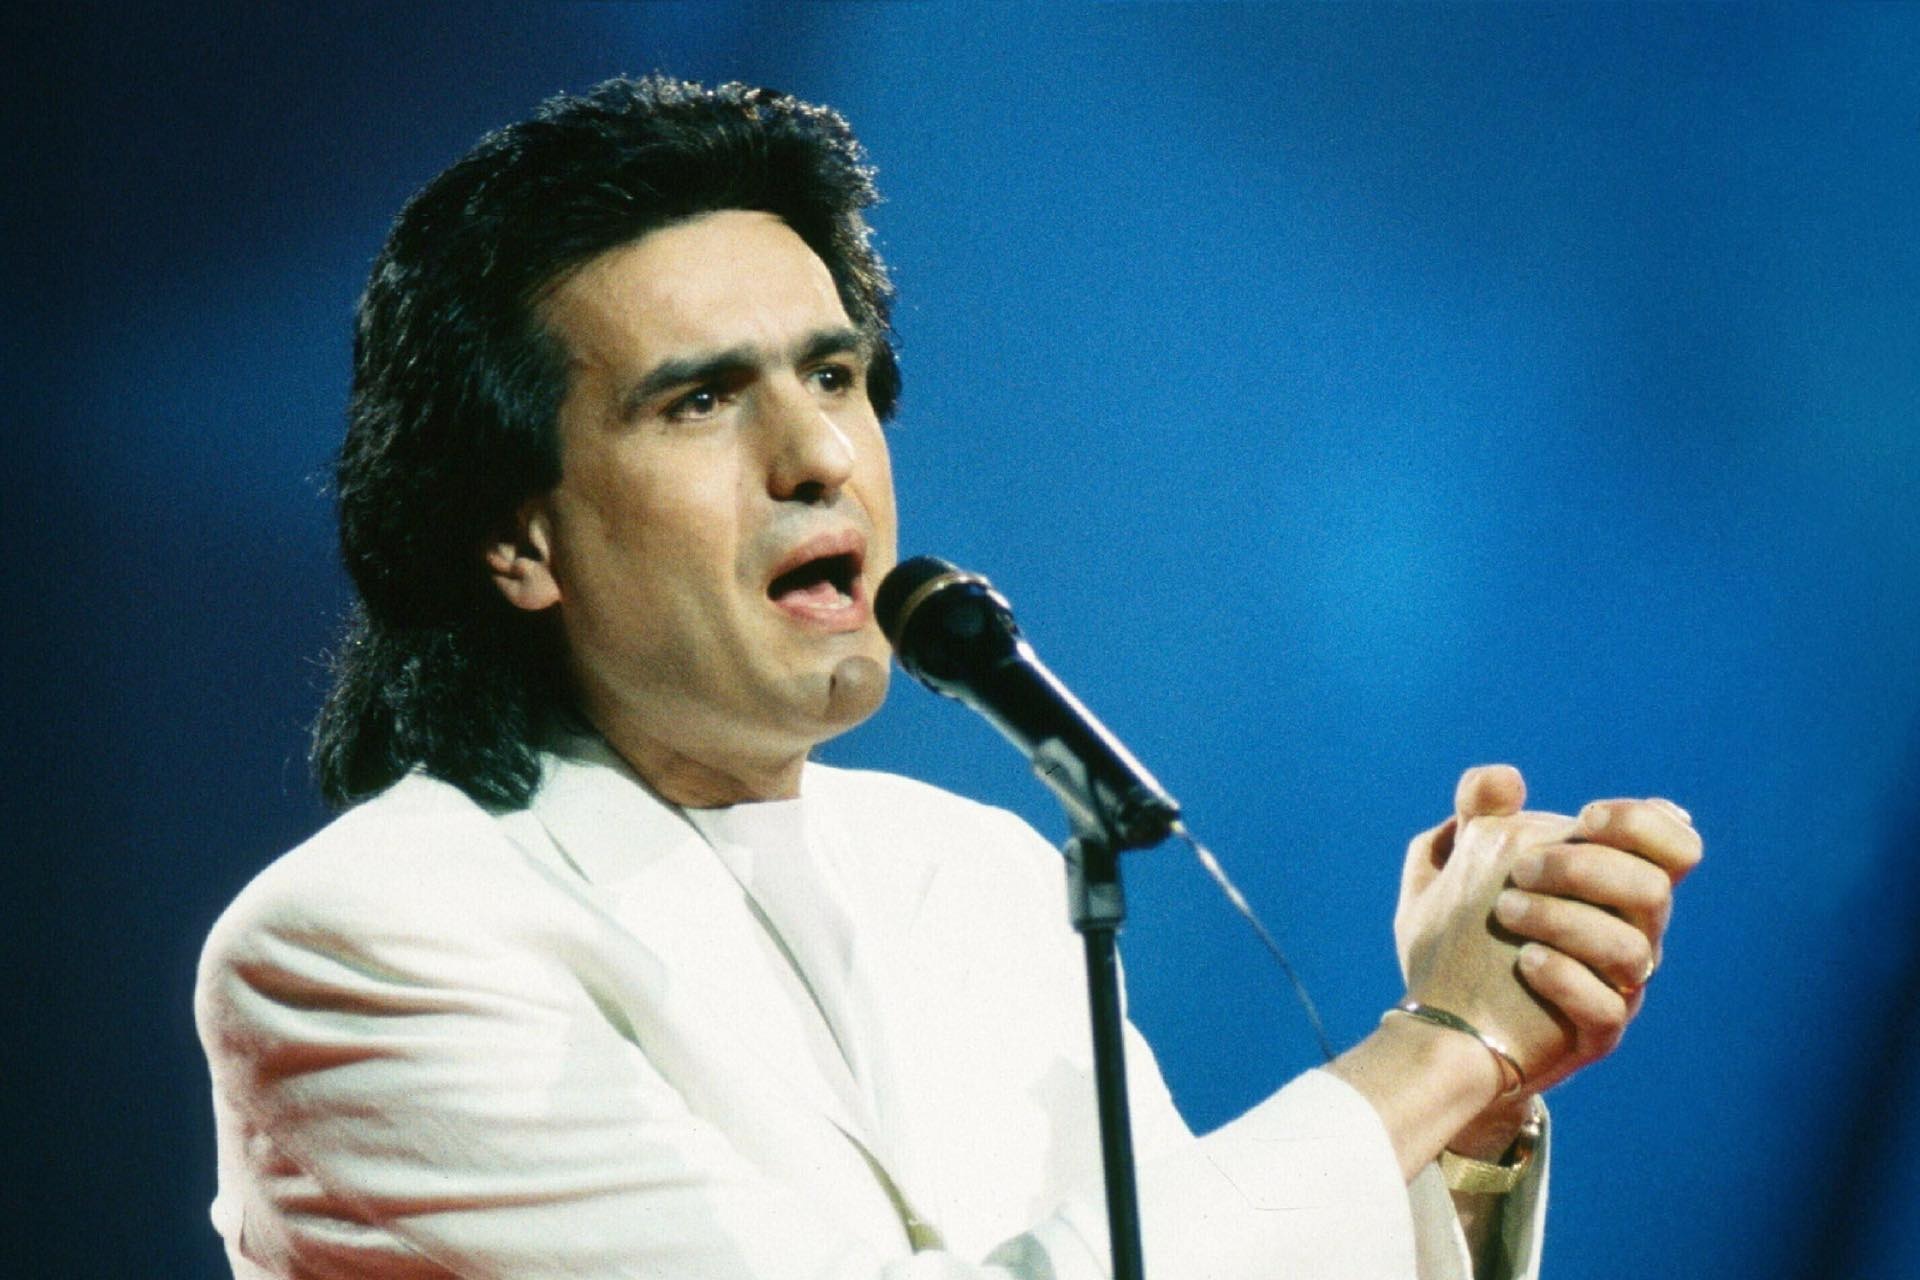 Toto Cutugno, Eurovision Song Contest, 90s history, Journey through time, 1920x1280 HD Desktop